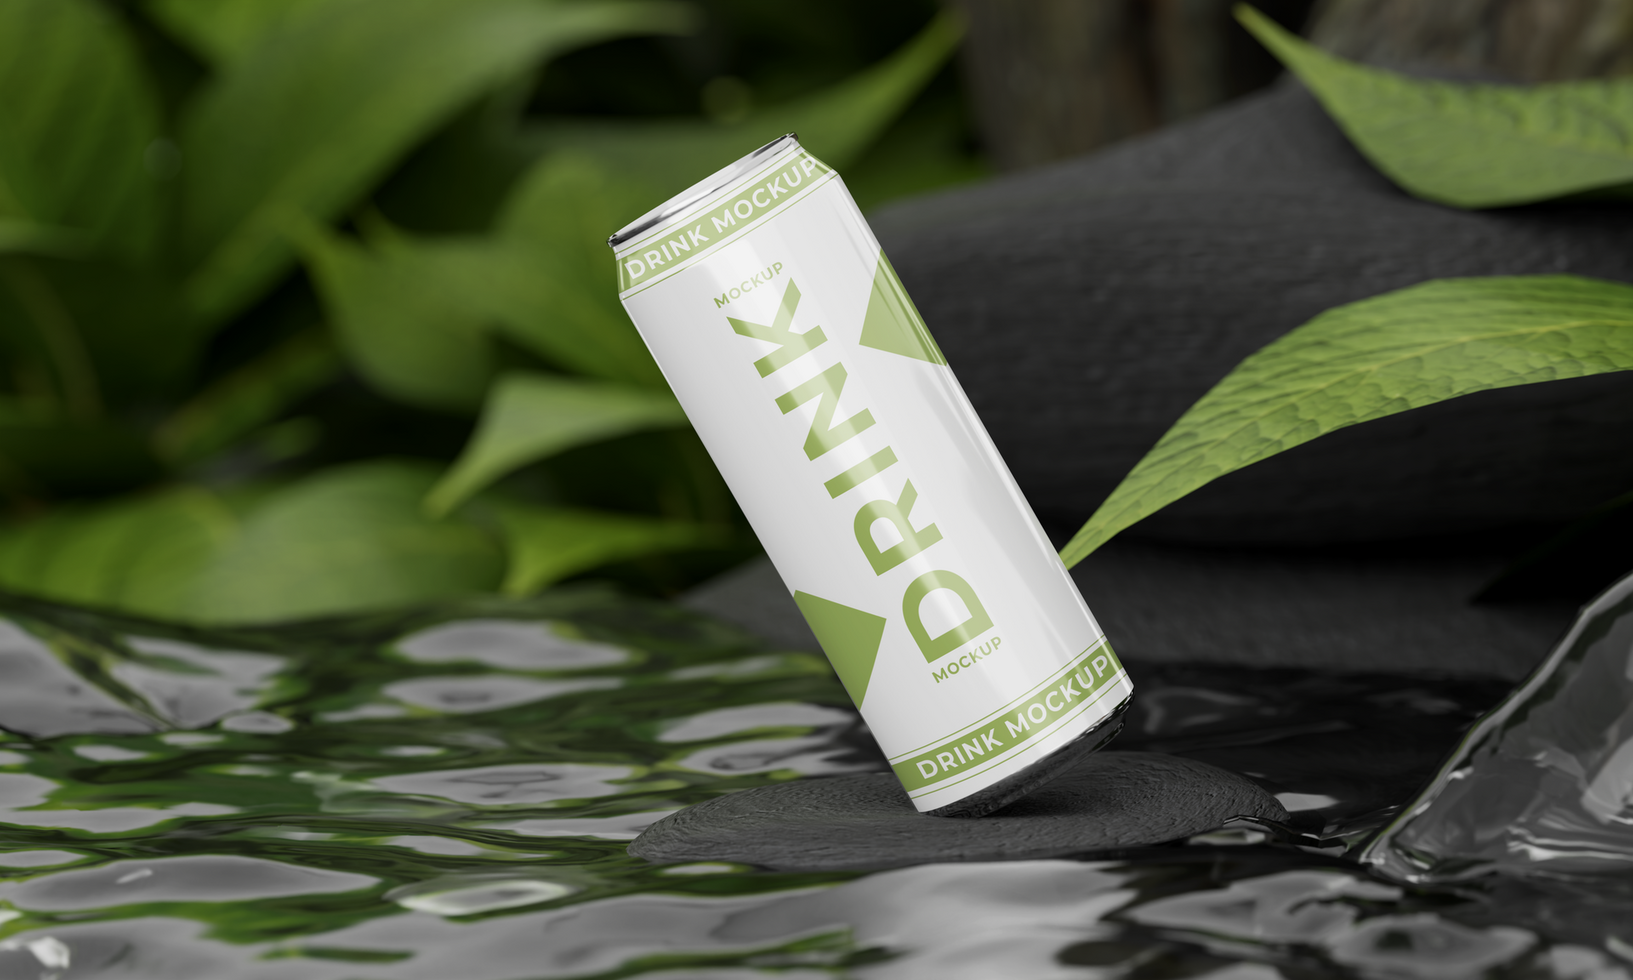 Branding can drink mockup nature style psd